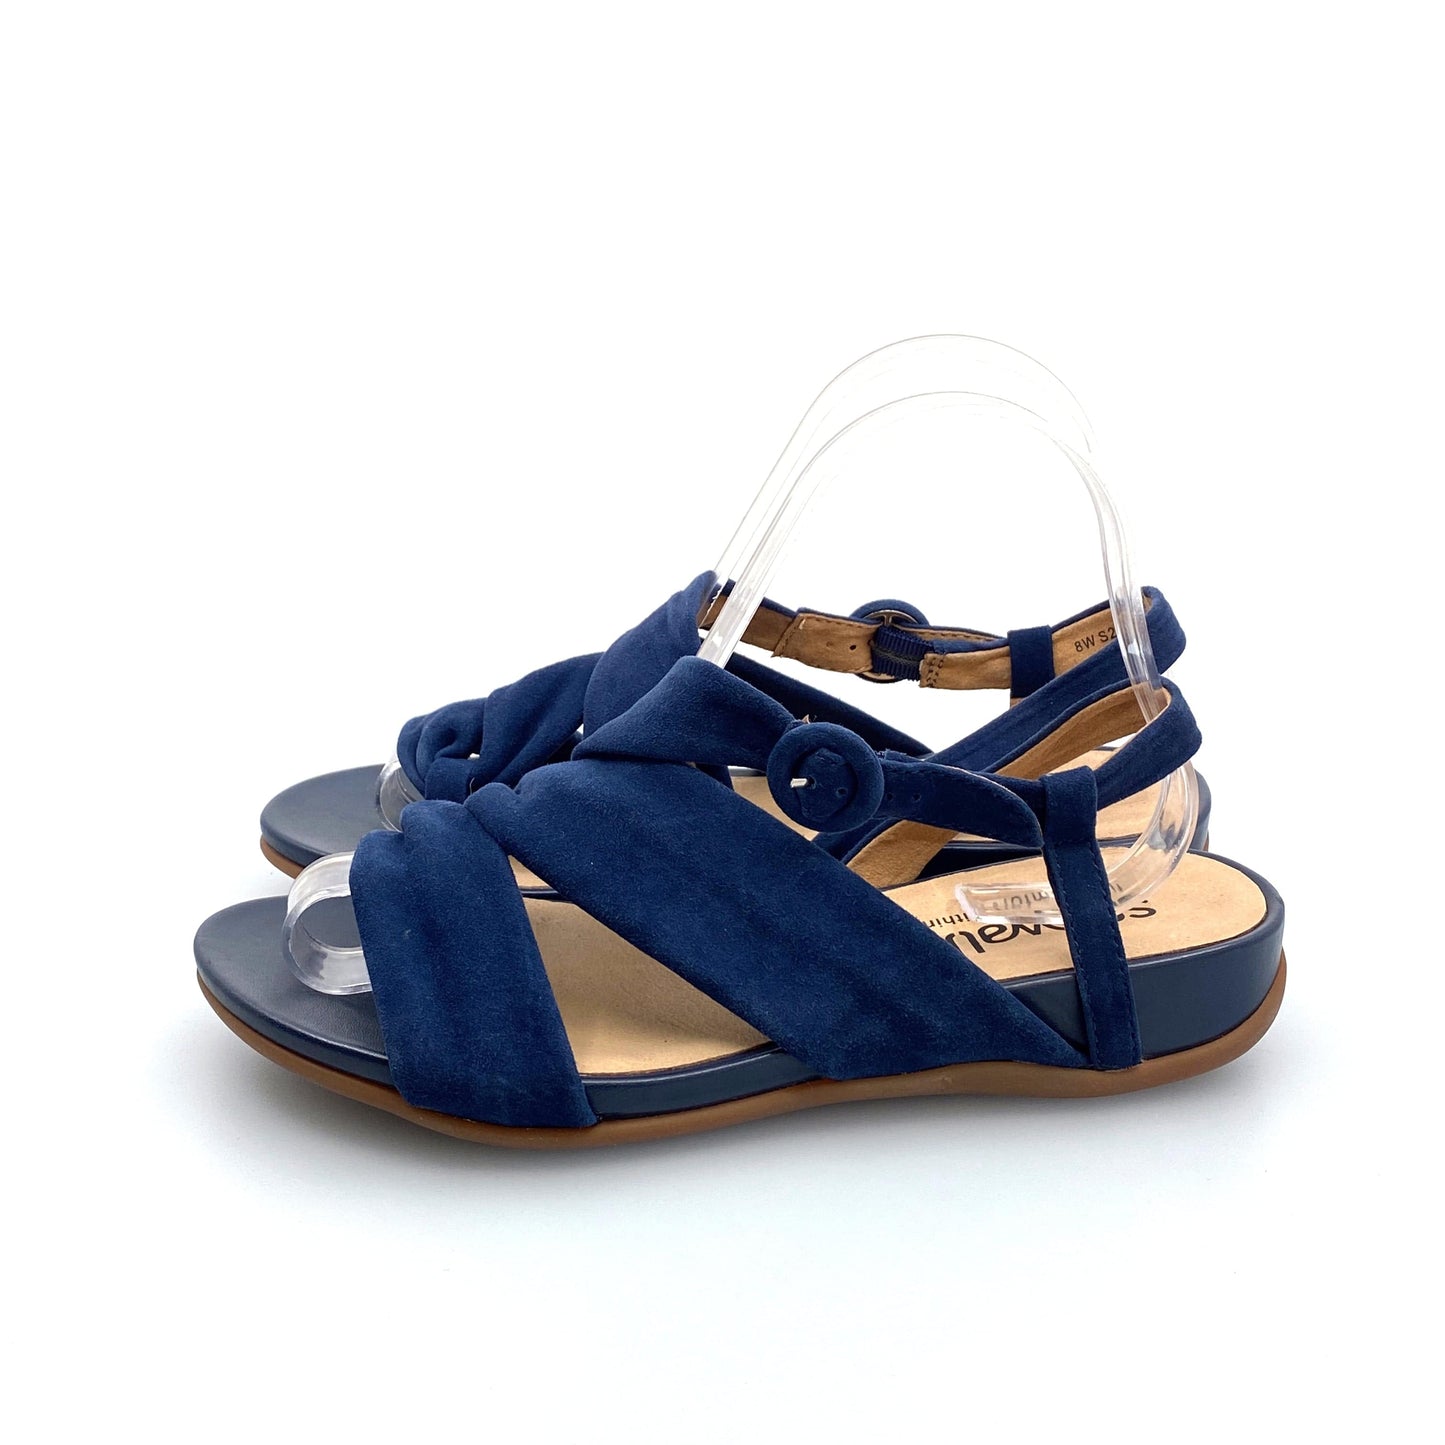 Softwalk Tieli Womens Size 8W Navy Blue Strappy Buckle Sandals Shoes